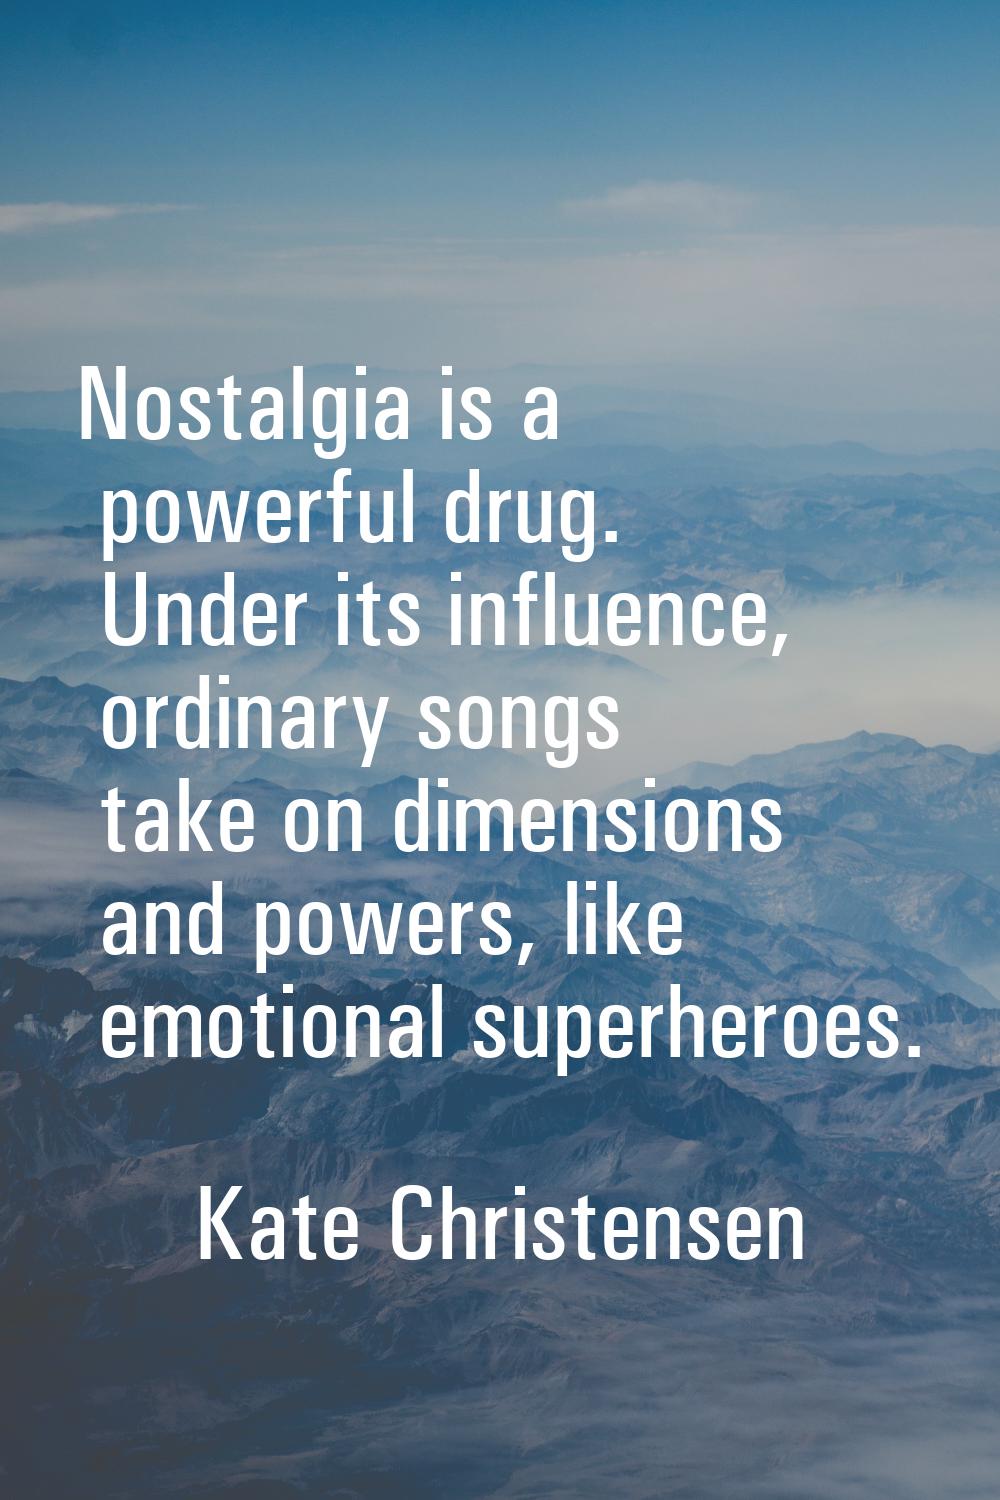 Nostalgia is a powerful drug. Under its influence, ordinary songs take on dimensions and powers, li